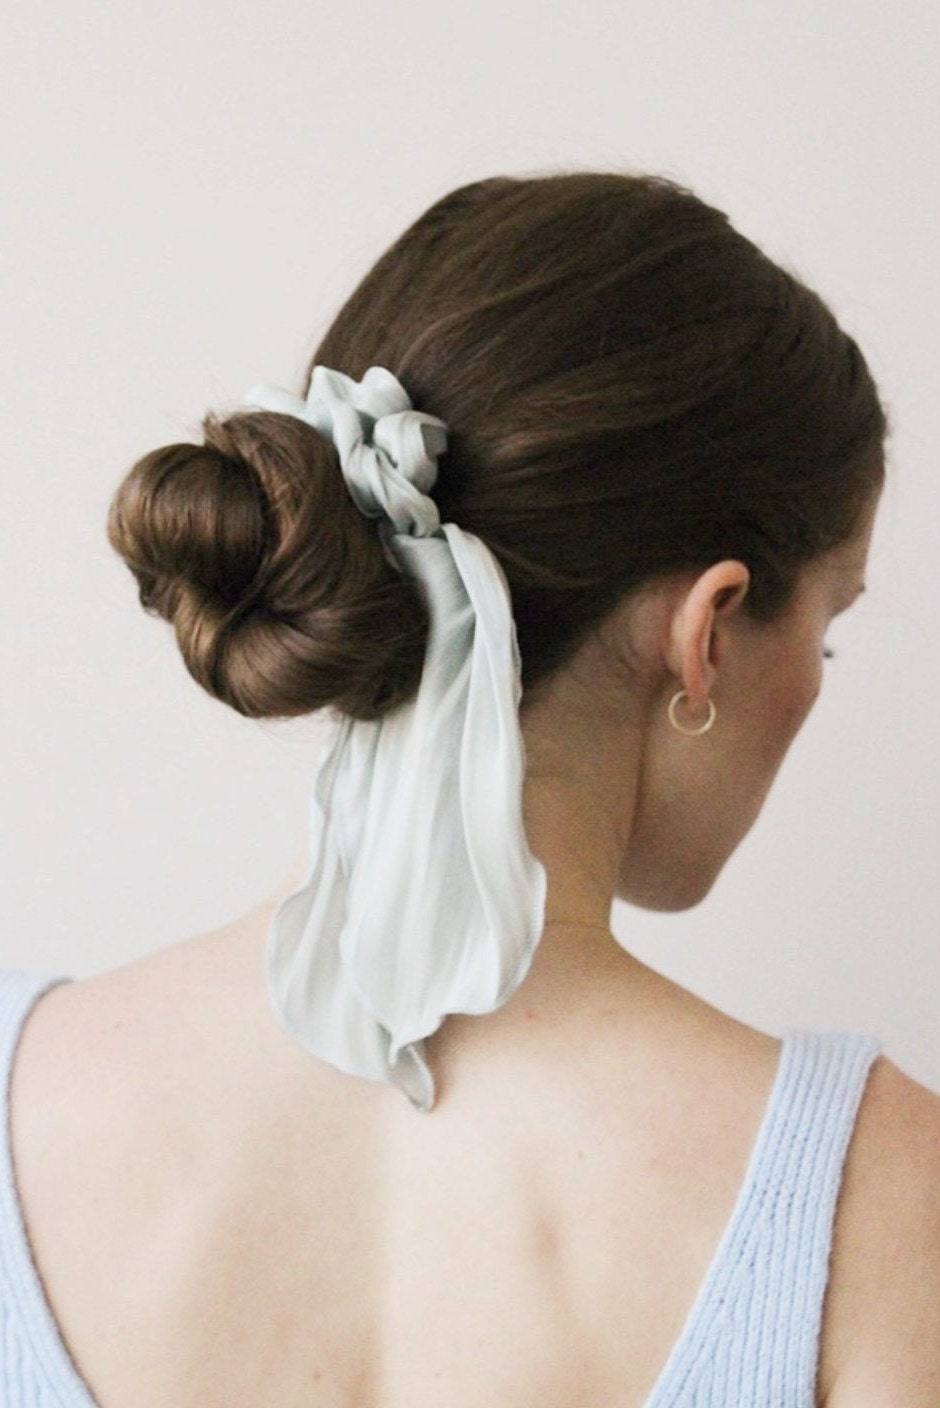 veryshine.com glossy organza knotted scrunchies tailed hair elastic tie women hair accessory